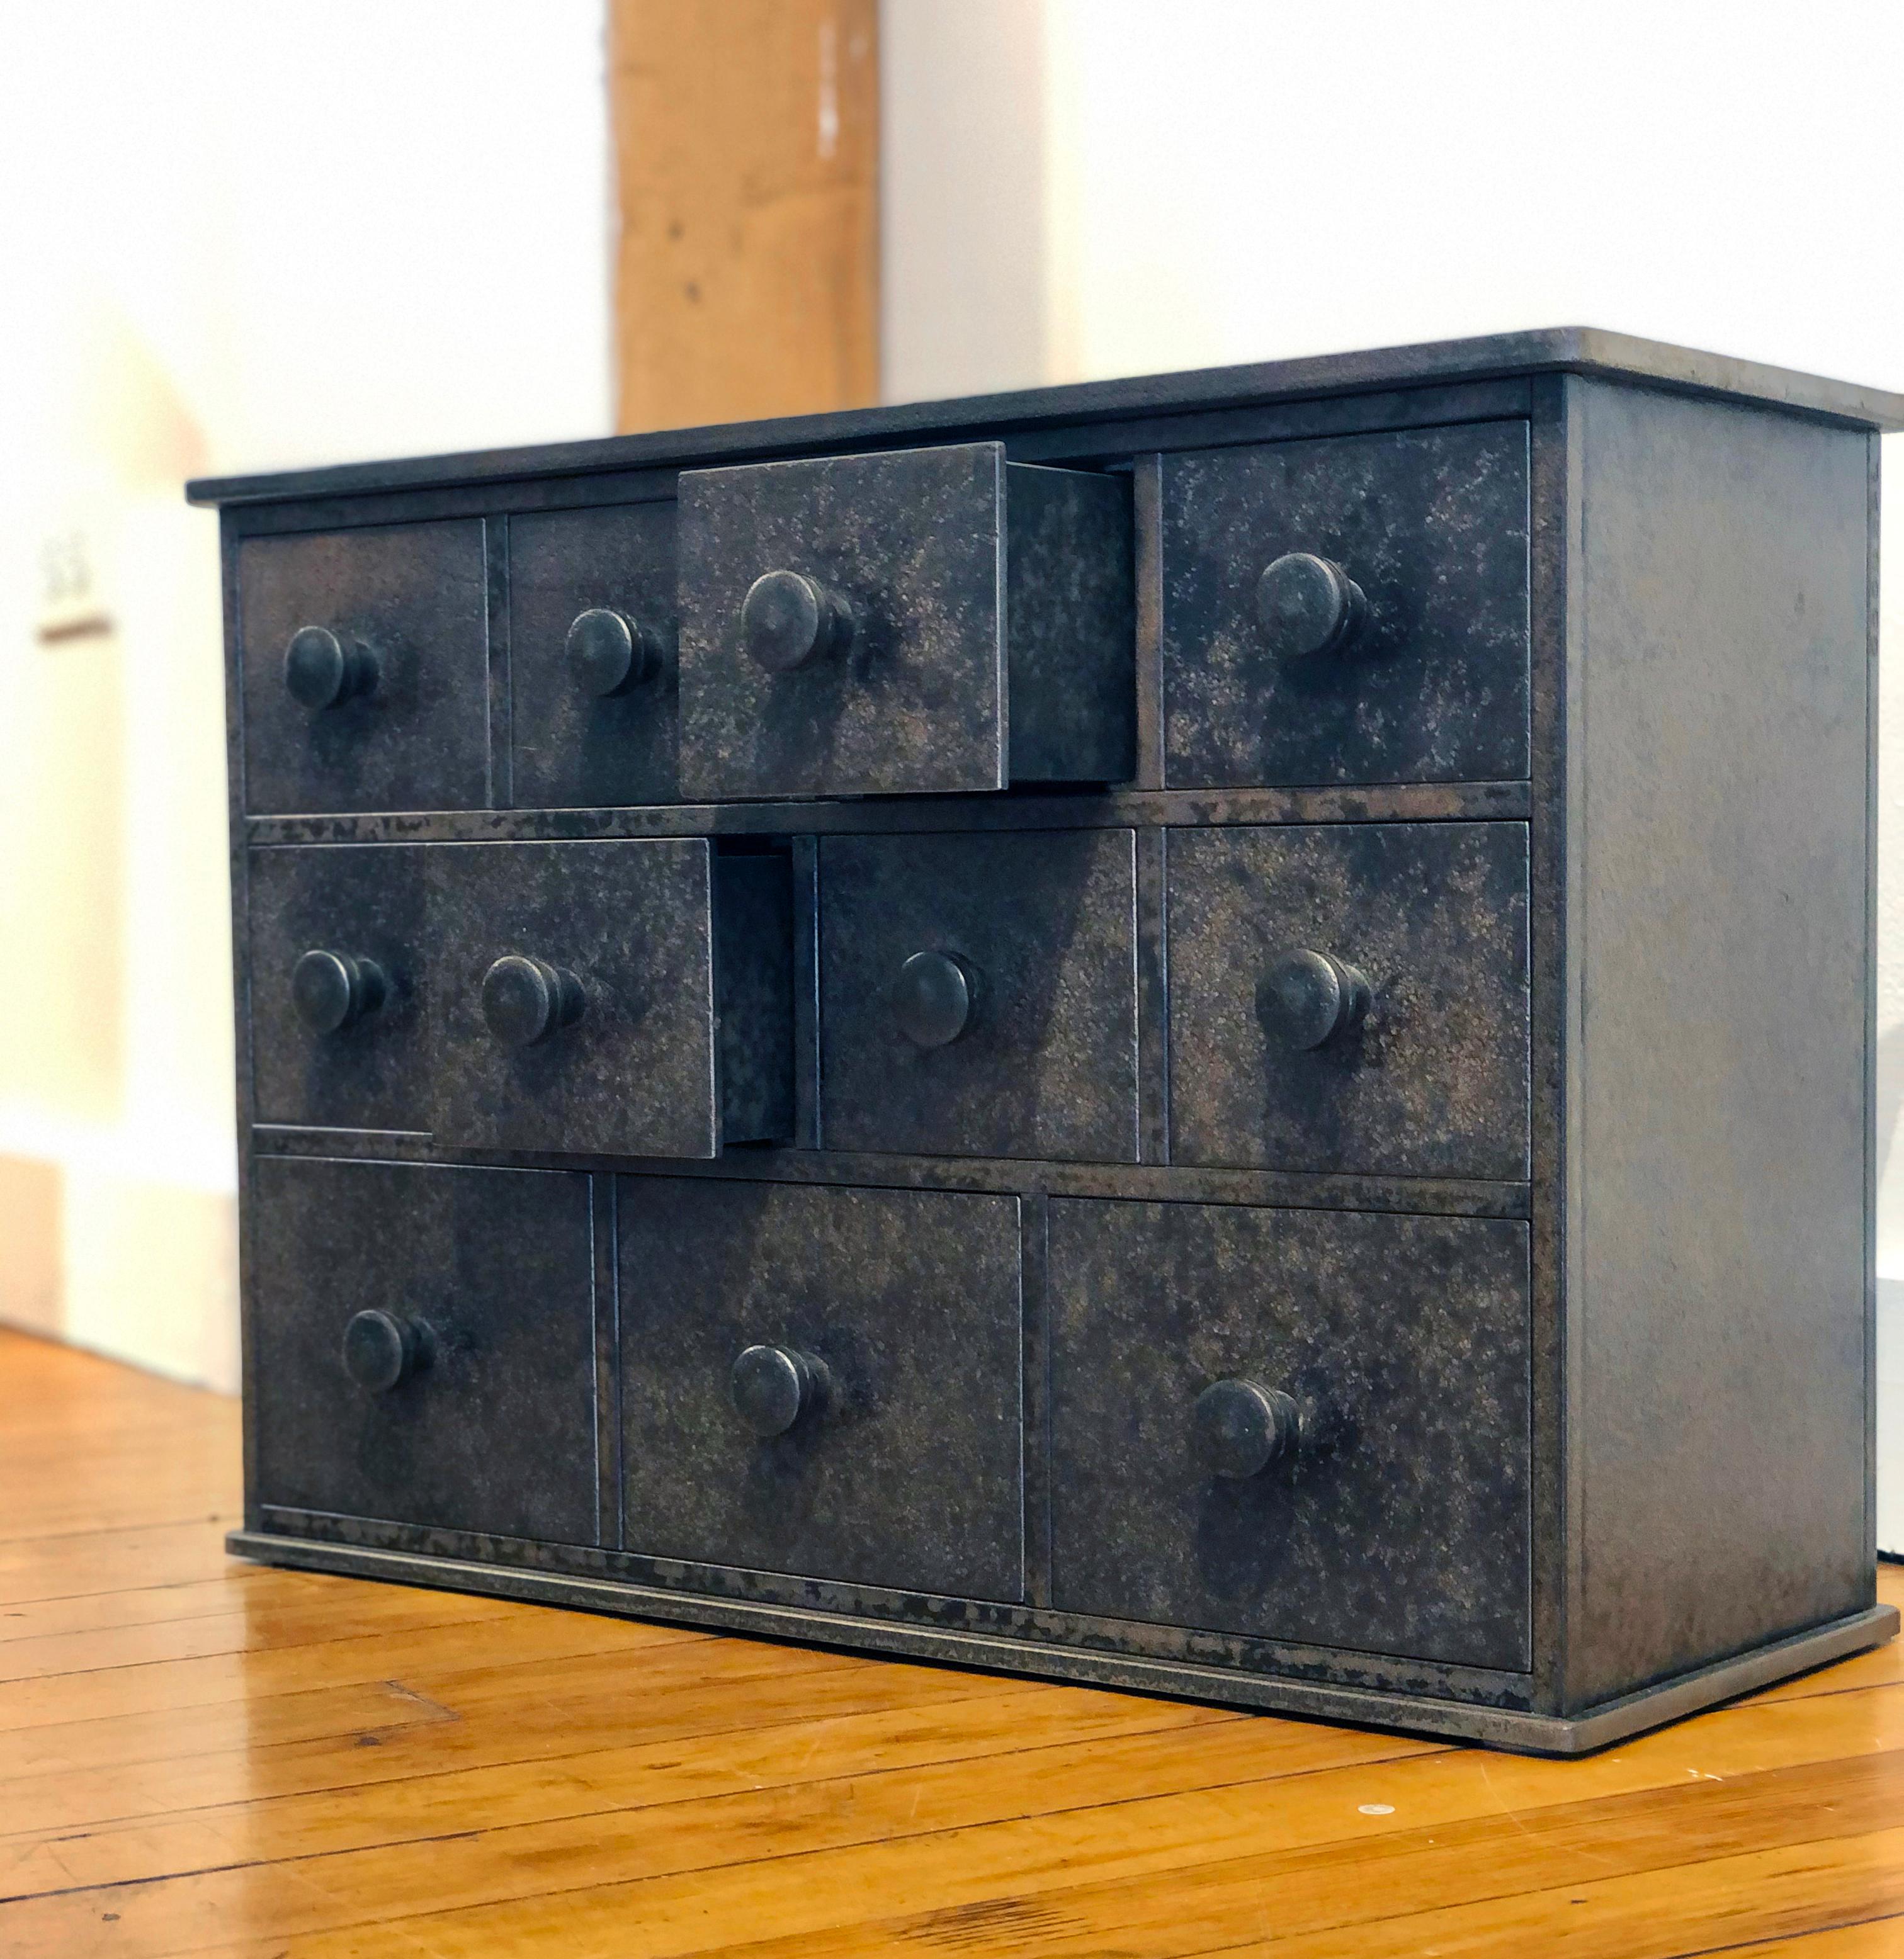 Welded Jim Rose Legacy Collection - 11 Drawer Cabinet, Shaker Inspired Steel Apothecary